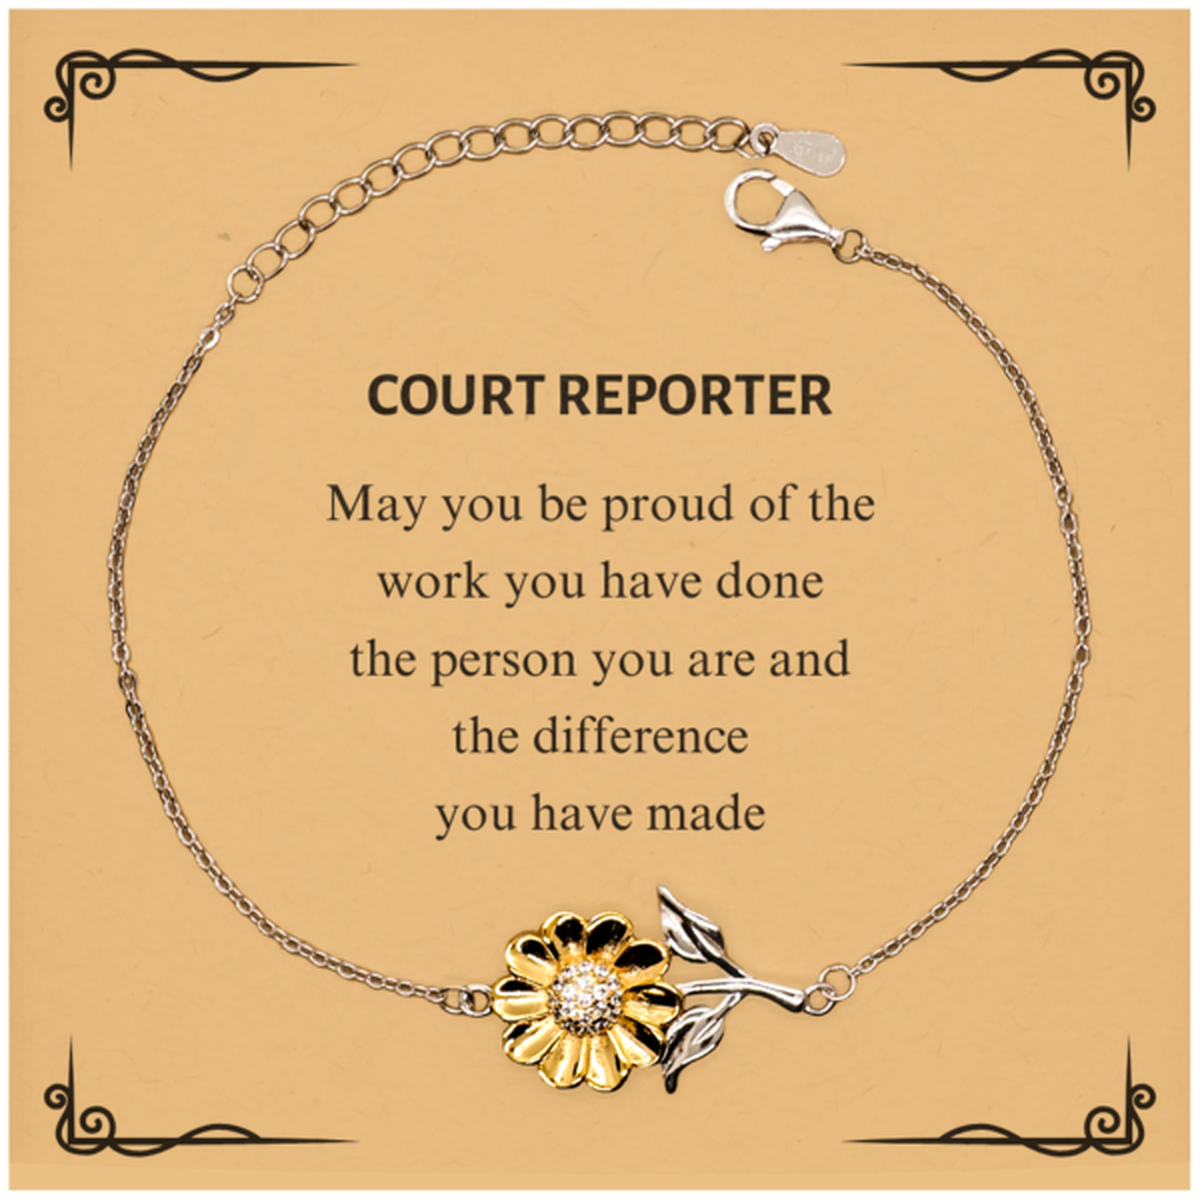 Court Reporter May you be proud of the work you have done, Retirement Court Reporter Sunflower Bracelet for Colleague Appreciation Gifts Amazing for Court Reporter